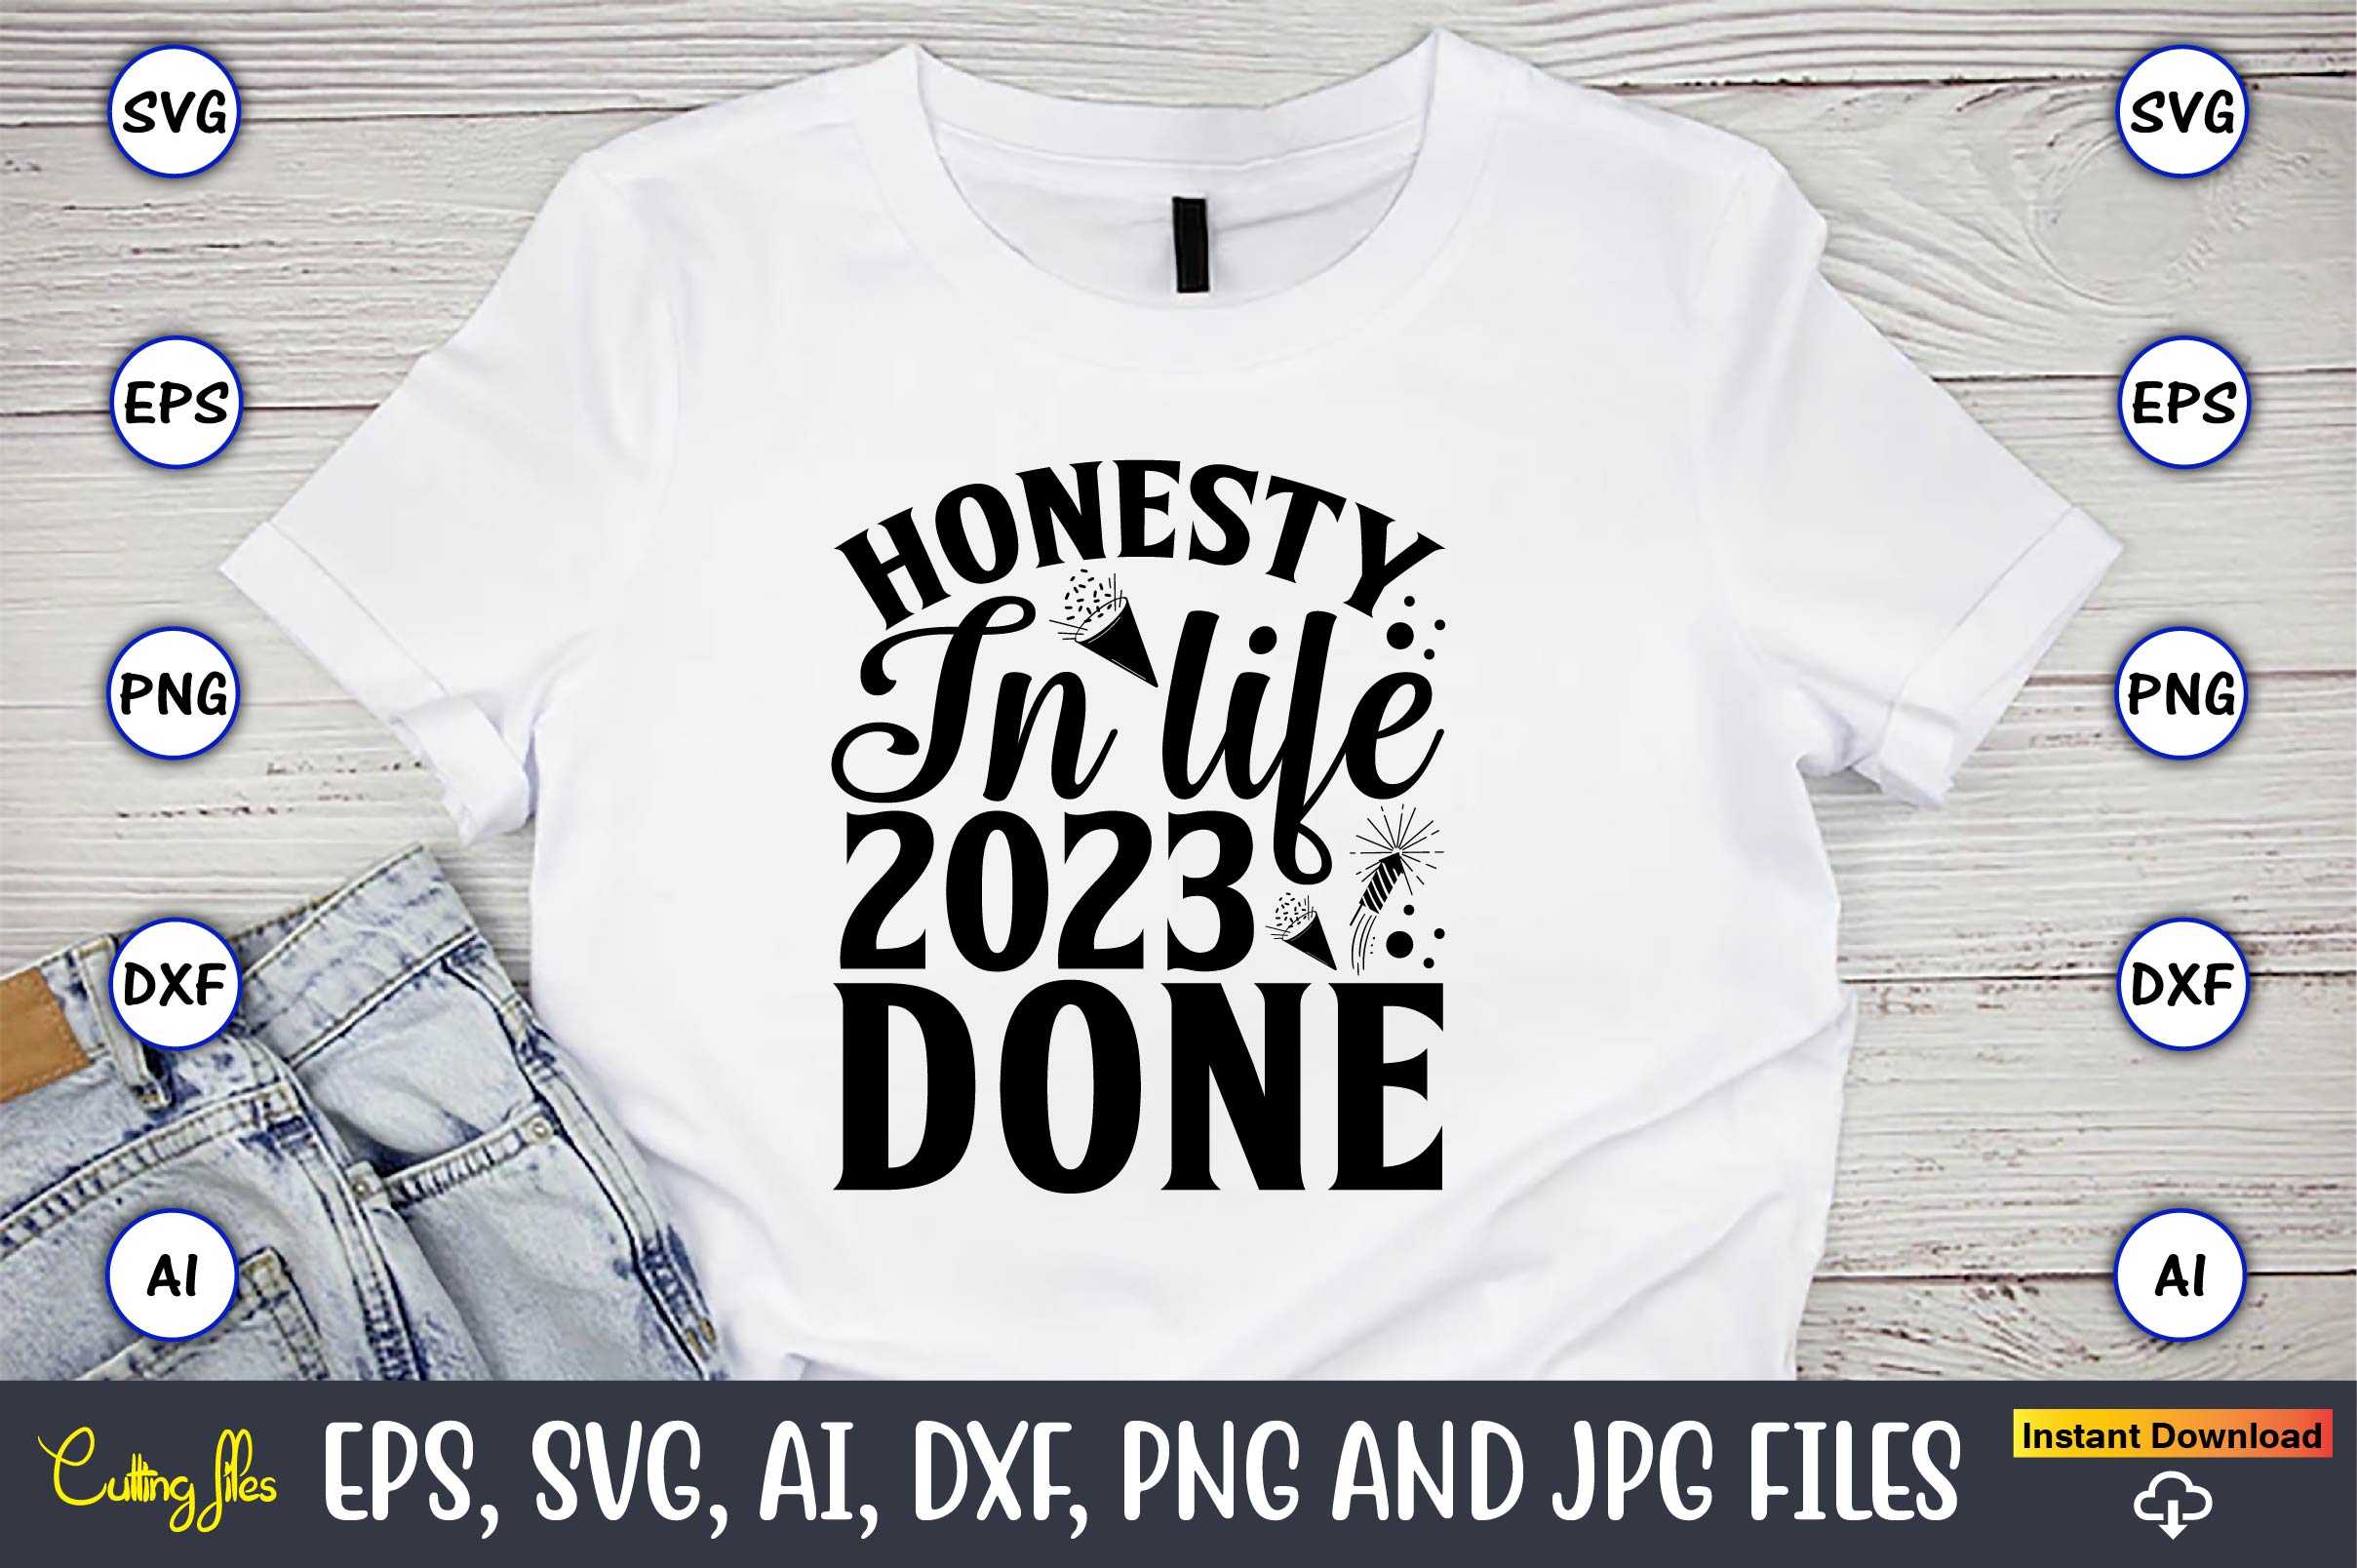 Image of a white t-shirt with a charming inscription Honesty in life 2023 done.